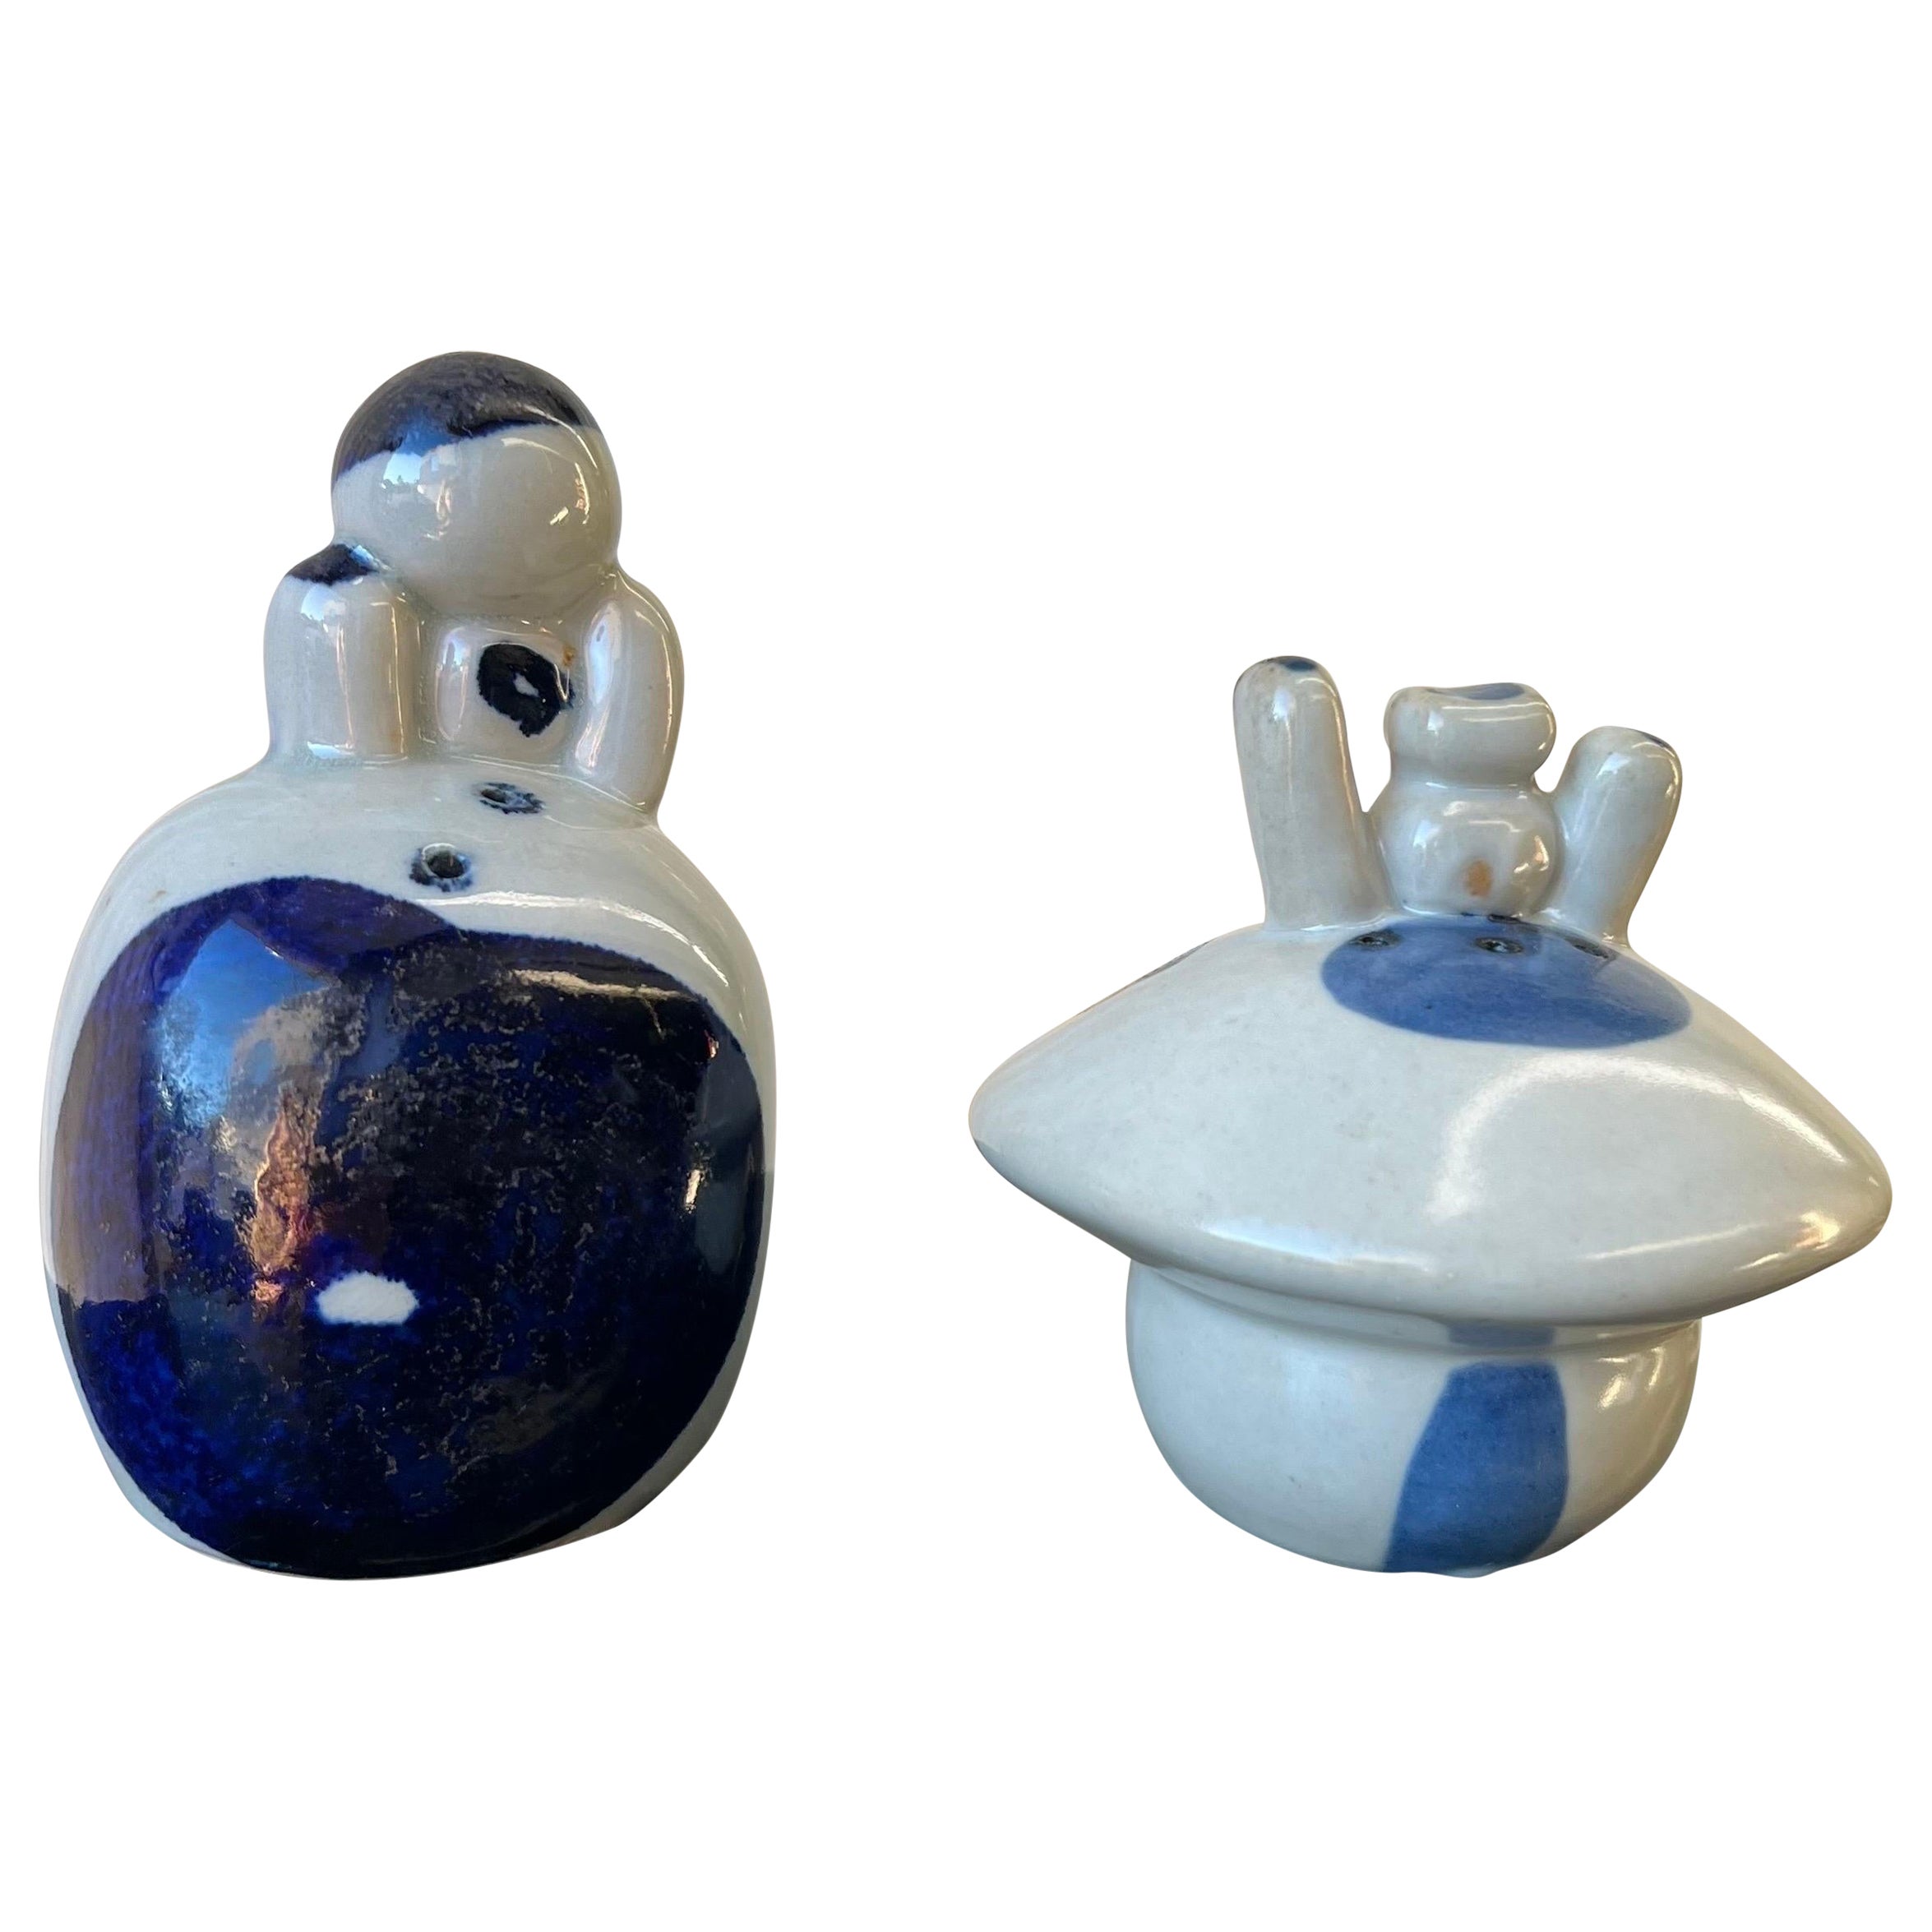 Vintage Figurative Studio Pottery Salt and Pepper Shakers - a Pair